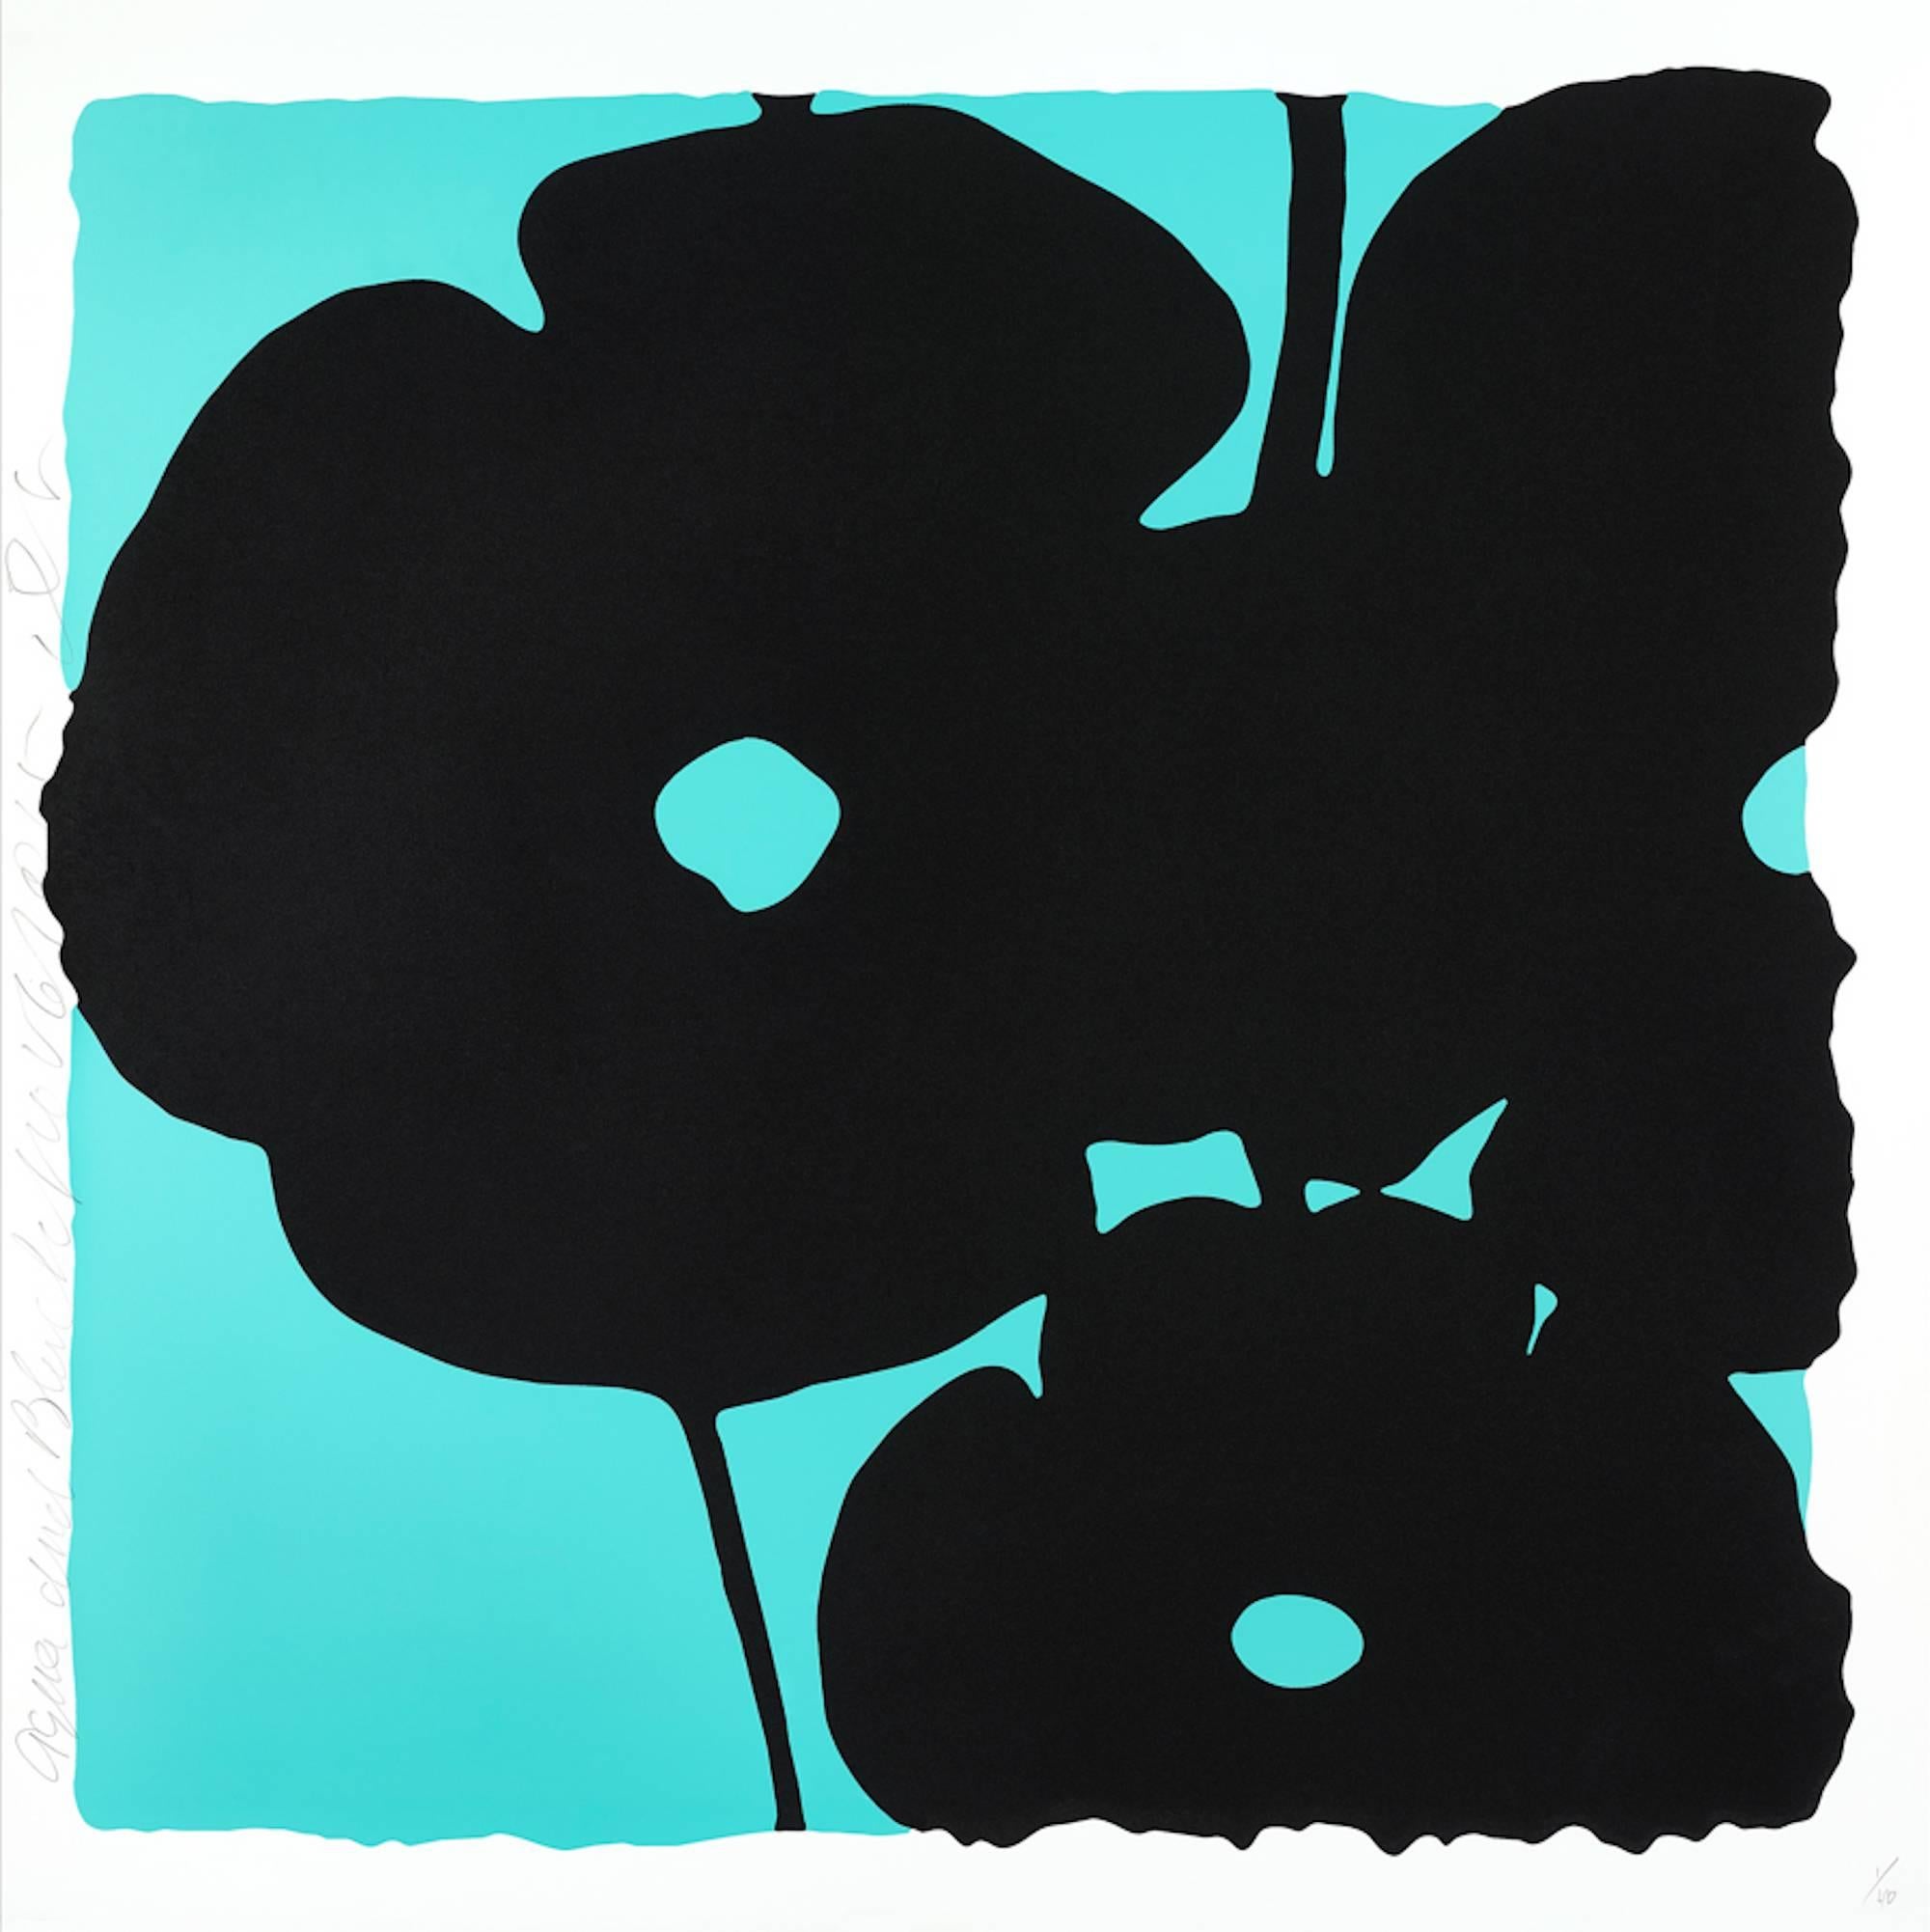 Reversal Poppies (Aqua And Black) - Print by Donald Sultan